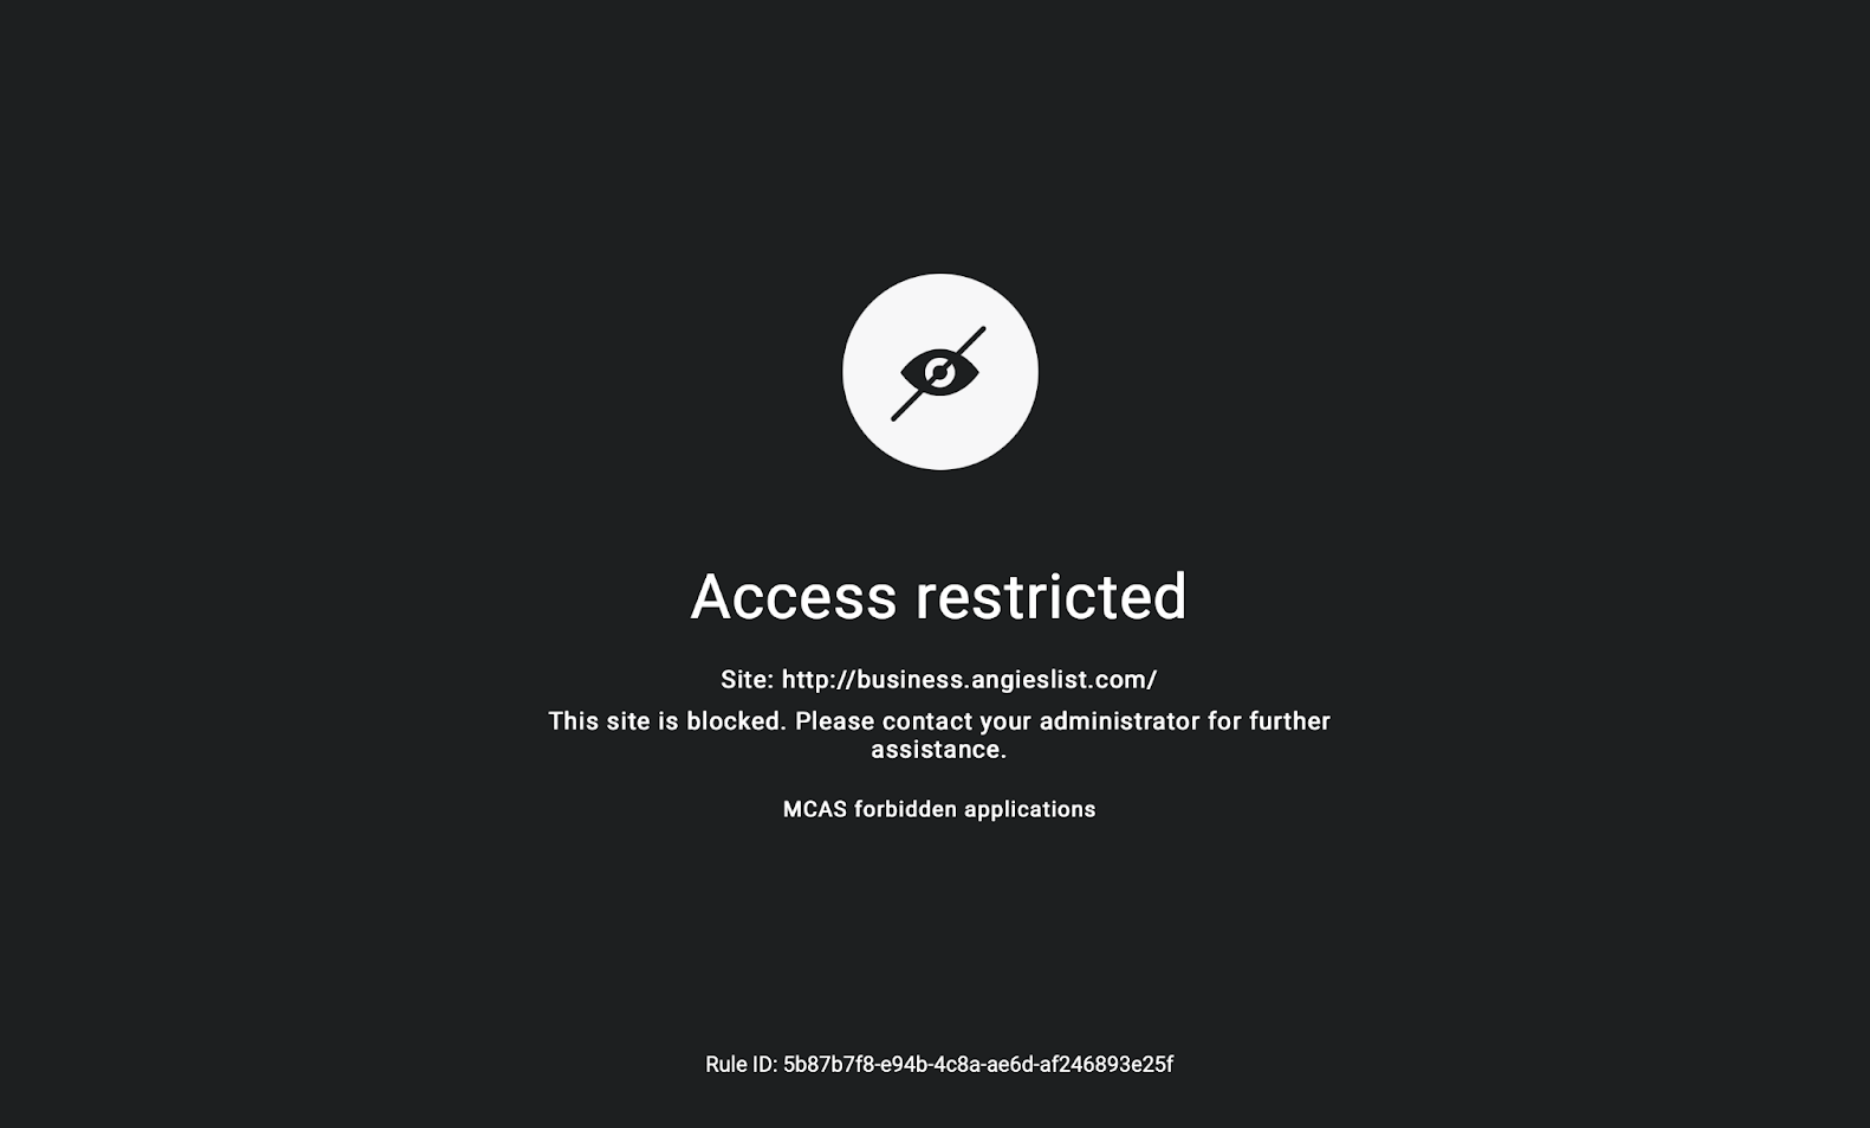 Access Restricted